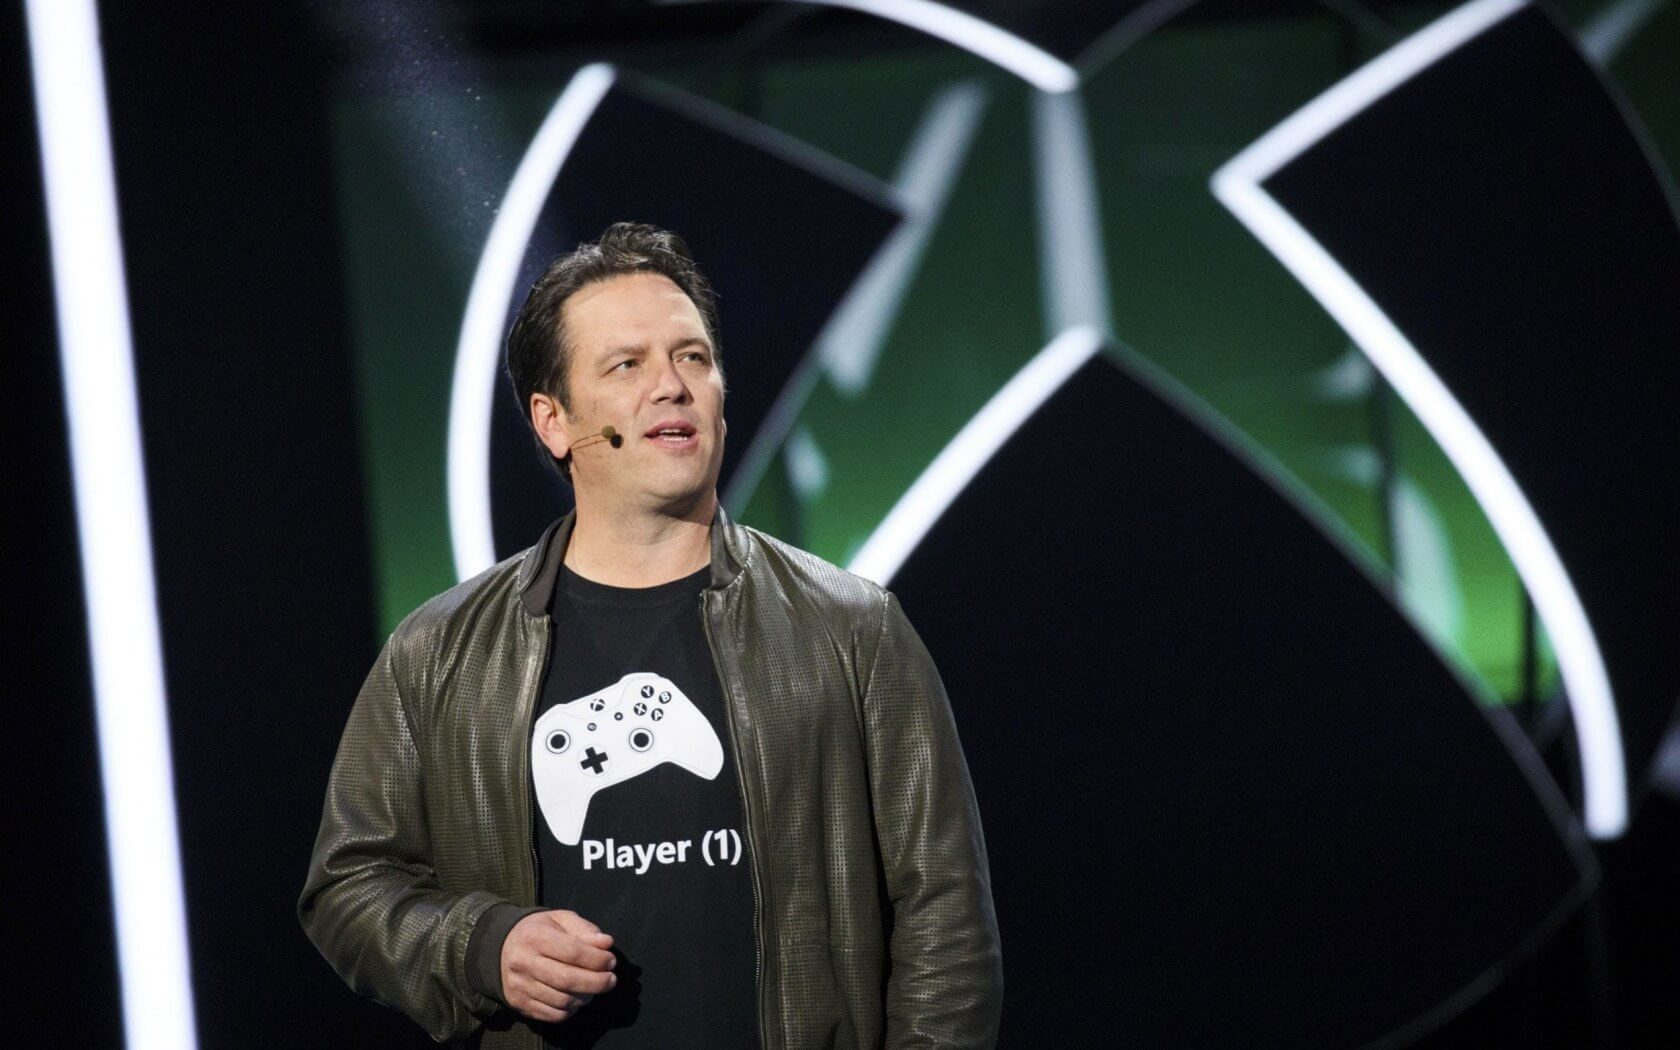 Xbox chief Phil Spencer says video games are for 'everyone,' commits to fighting 'toxic' behavior